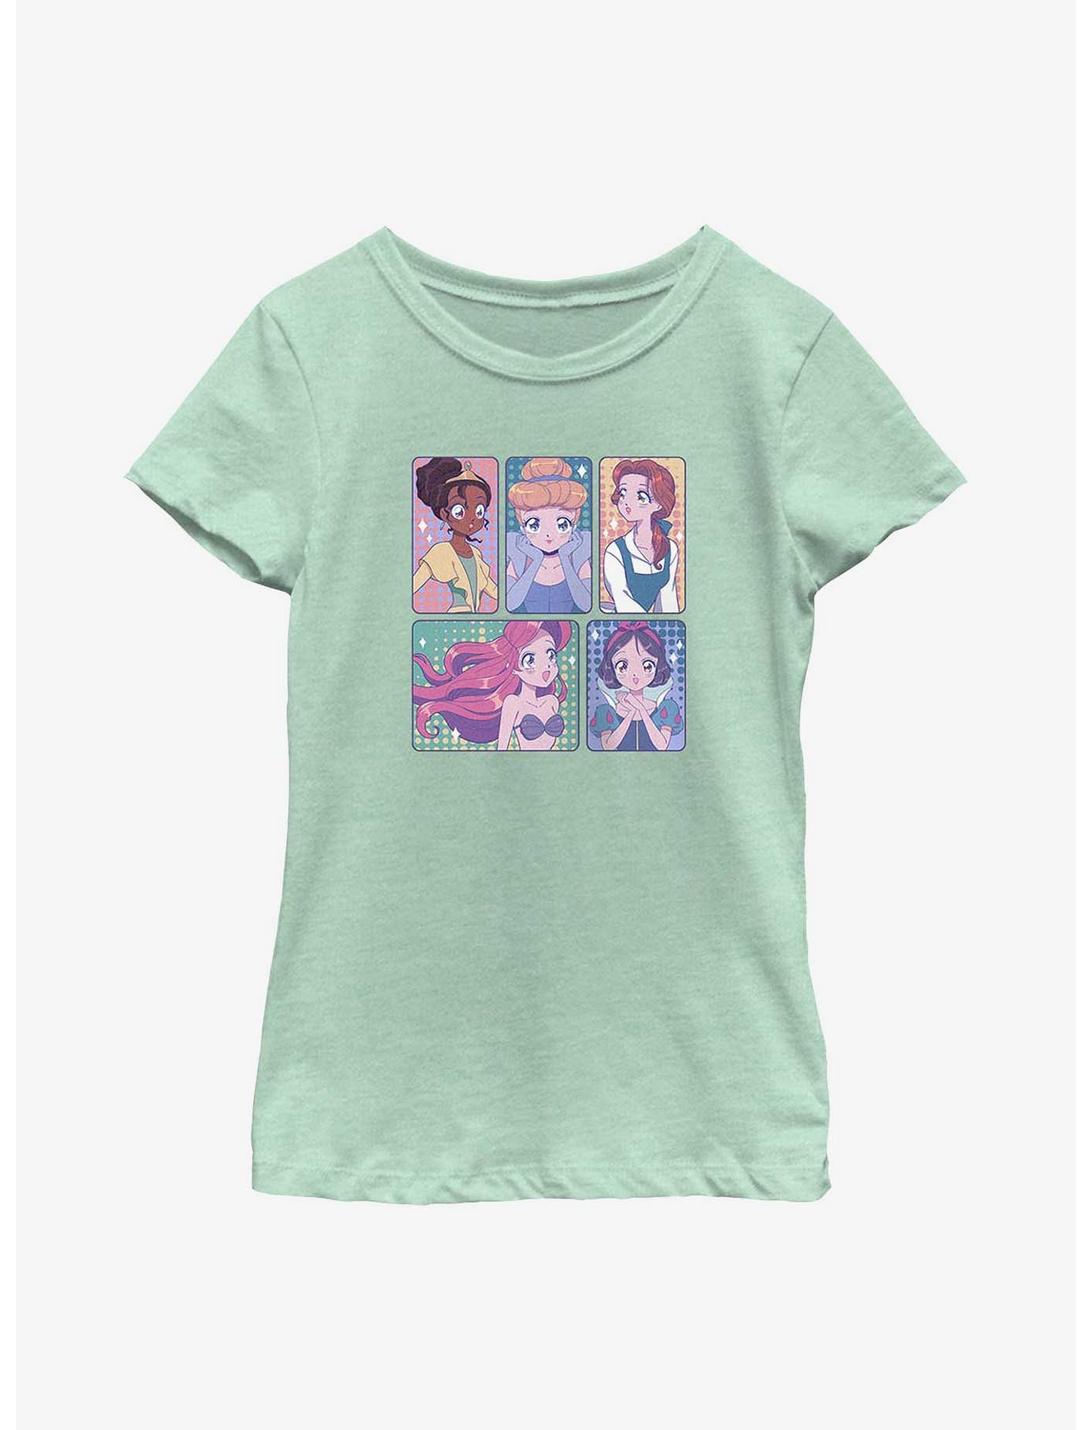 Disney Snow White and the Seven Dwarfs Anime Style Princess Panels Youth Girls T-Shirt, MINT, hi-res